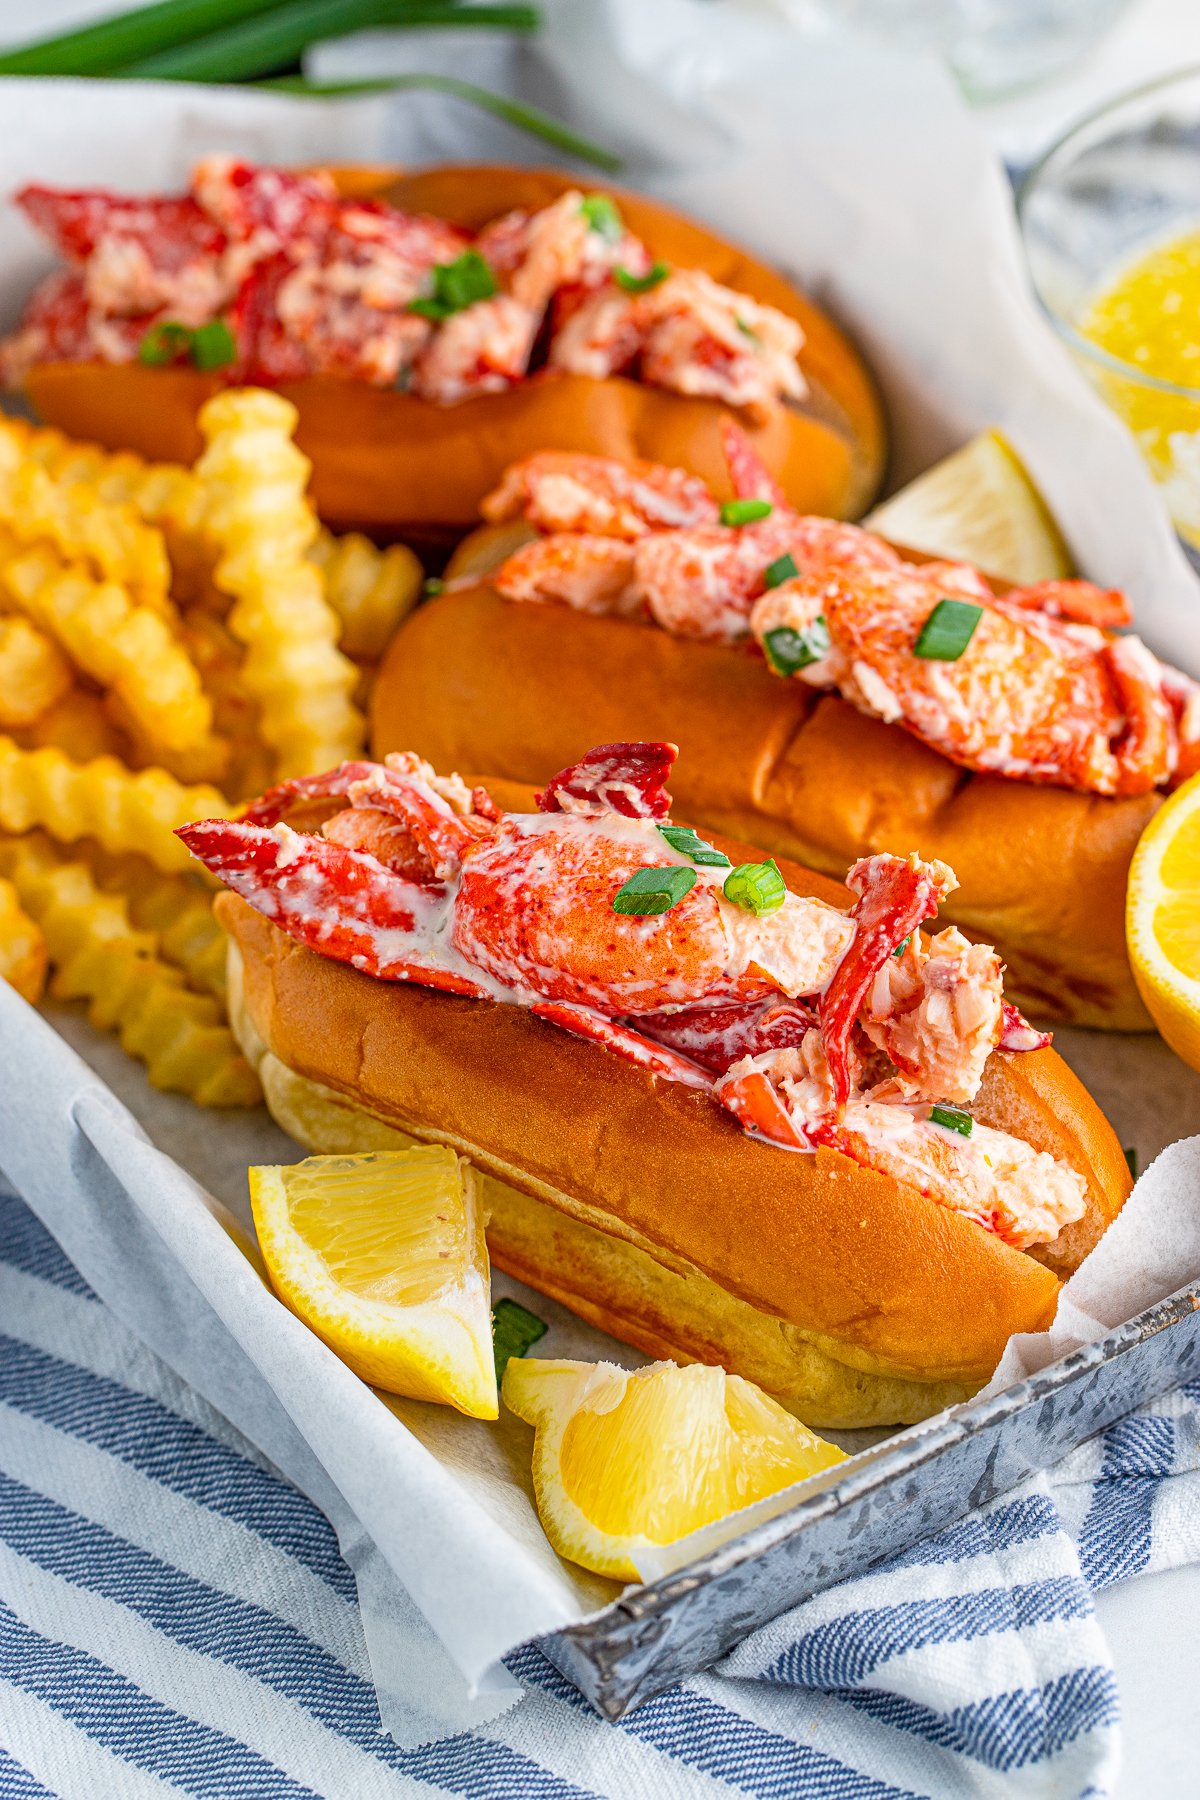 Three Lobster Rolls on tray with French fries and lemon wedges